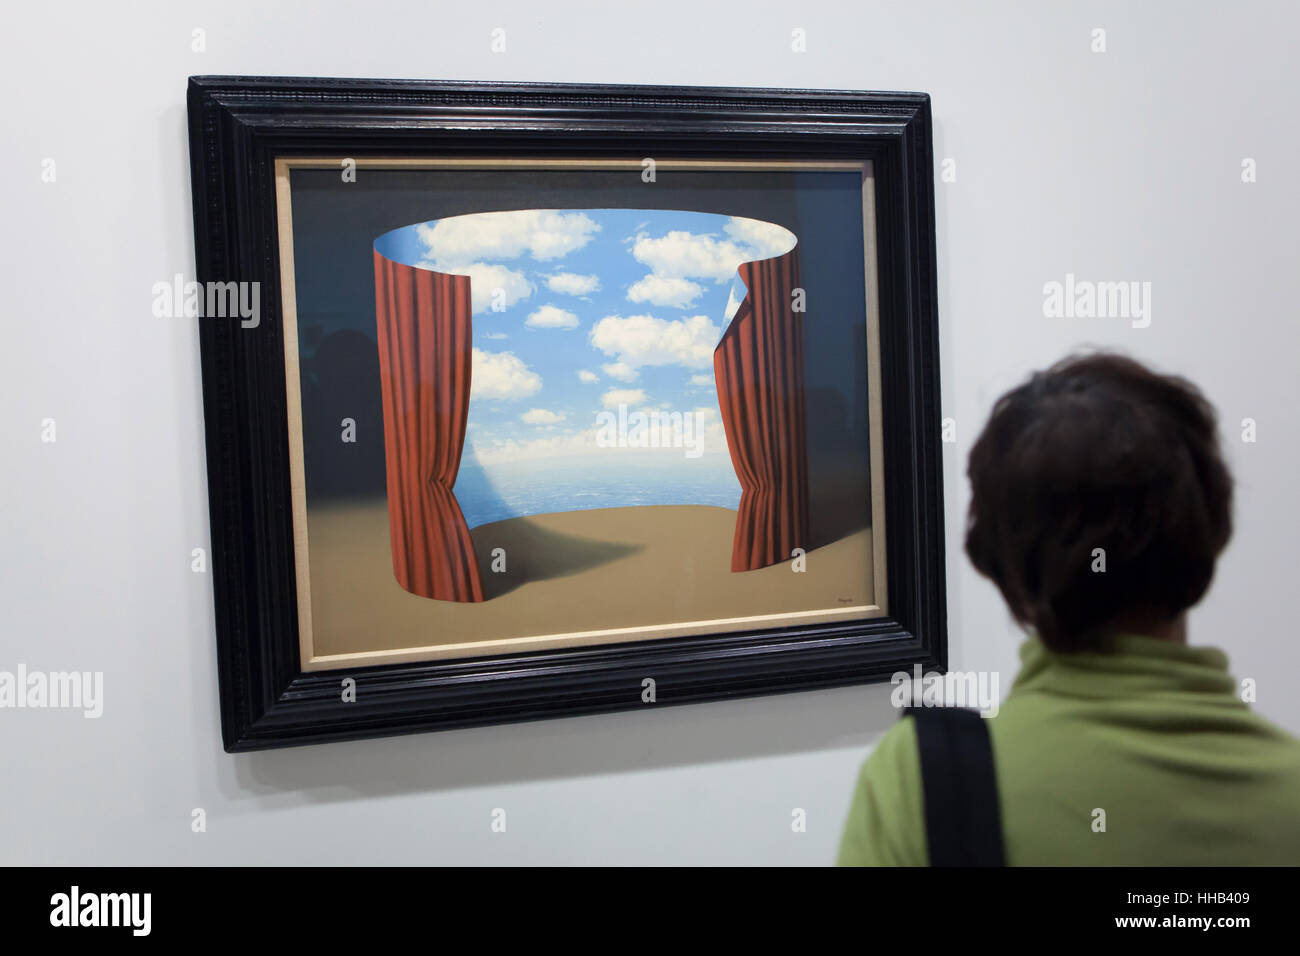 Visitor in front of the painting Les Memoires d'un saint (Memories of a Saint, 1960) by Belgian surrealist artist Rene Magritte displayed at his retrospective exhibition in the Centre Pompidou in Paris, France. The exhibition entitled 'Rene Magritte. The Treachery of Images' runs till 23 January 2017. After that the reformulated version of the exhibition will be presented at the Schirn Kunsthalle in Frankfurt am Main, Germany, from 10 February to 5 June 2017. Stock Photo